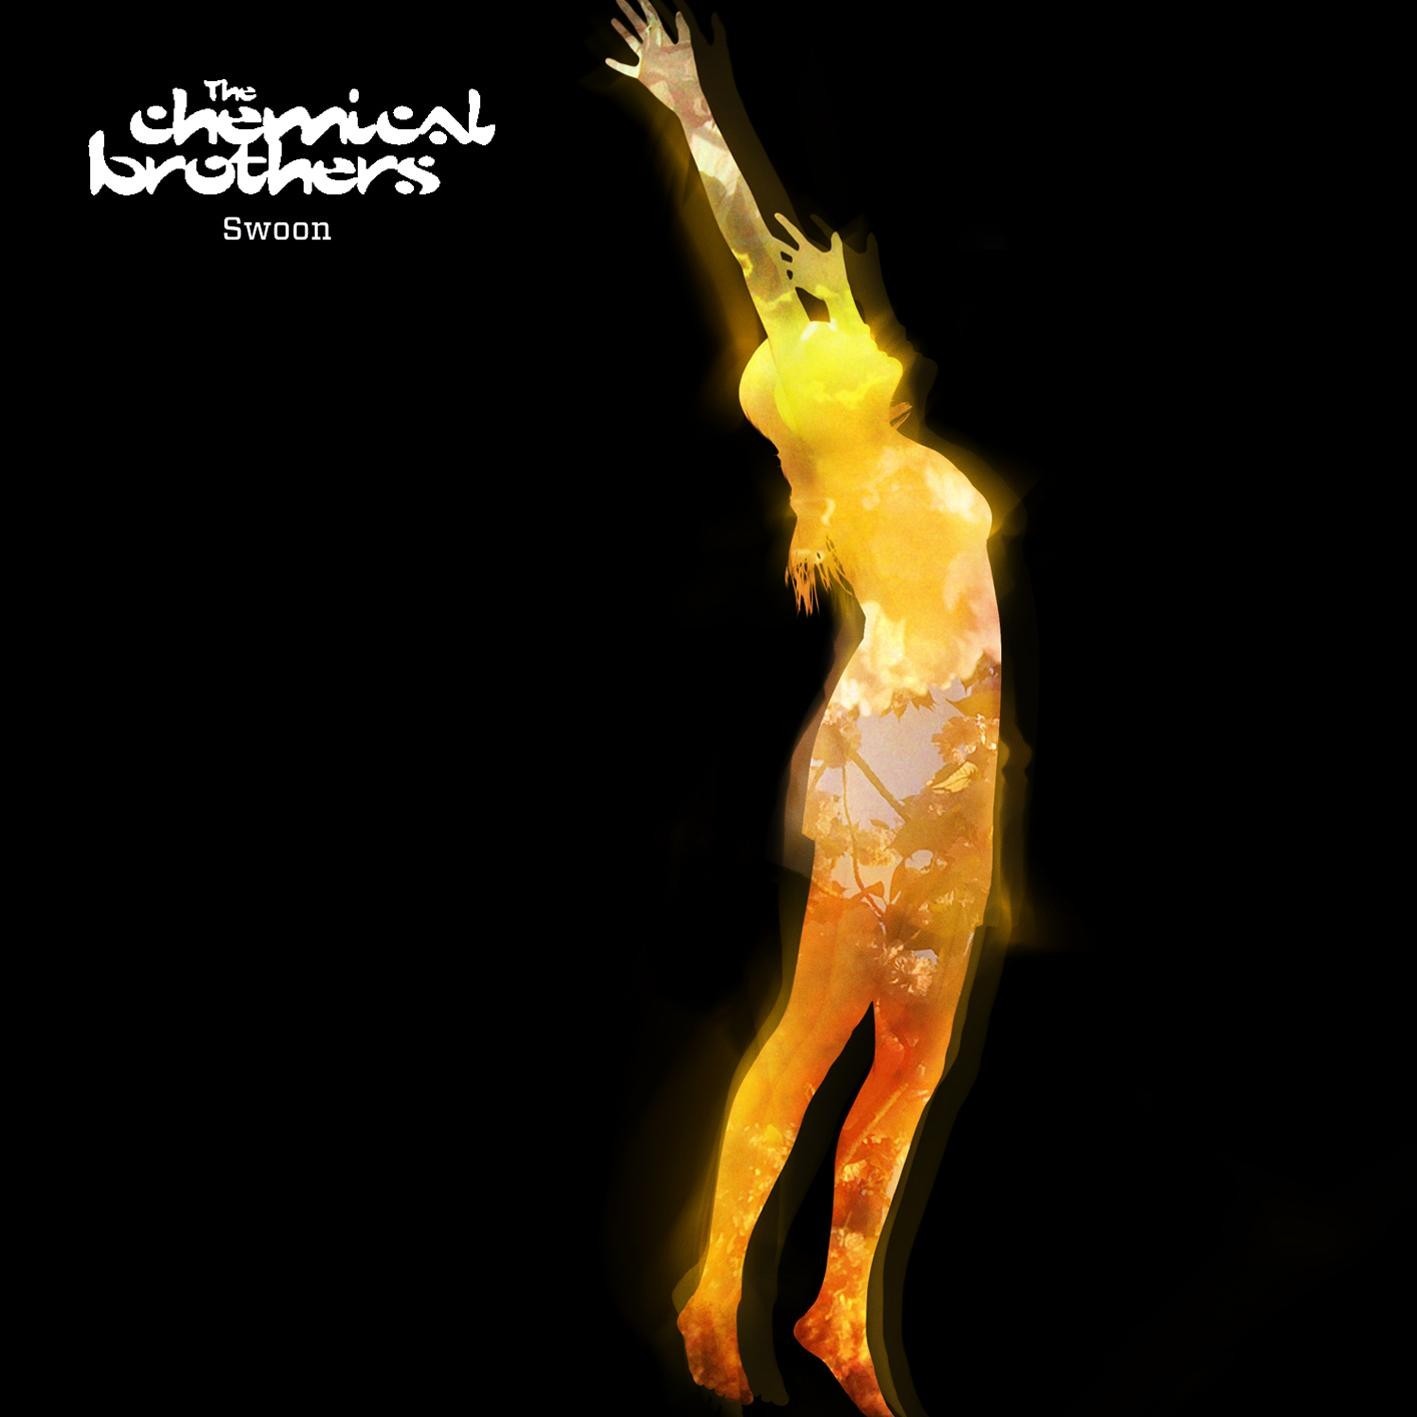 The Chemical Brothers - The Remixes: Swoon EP